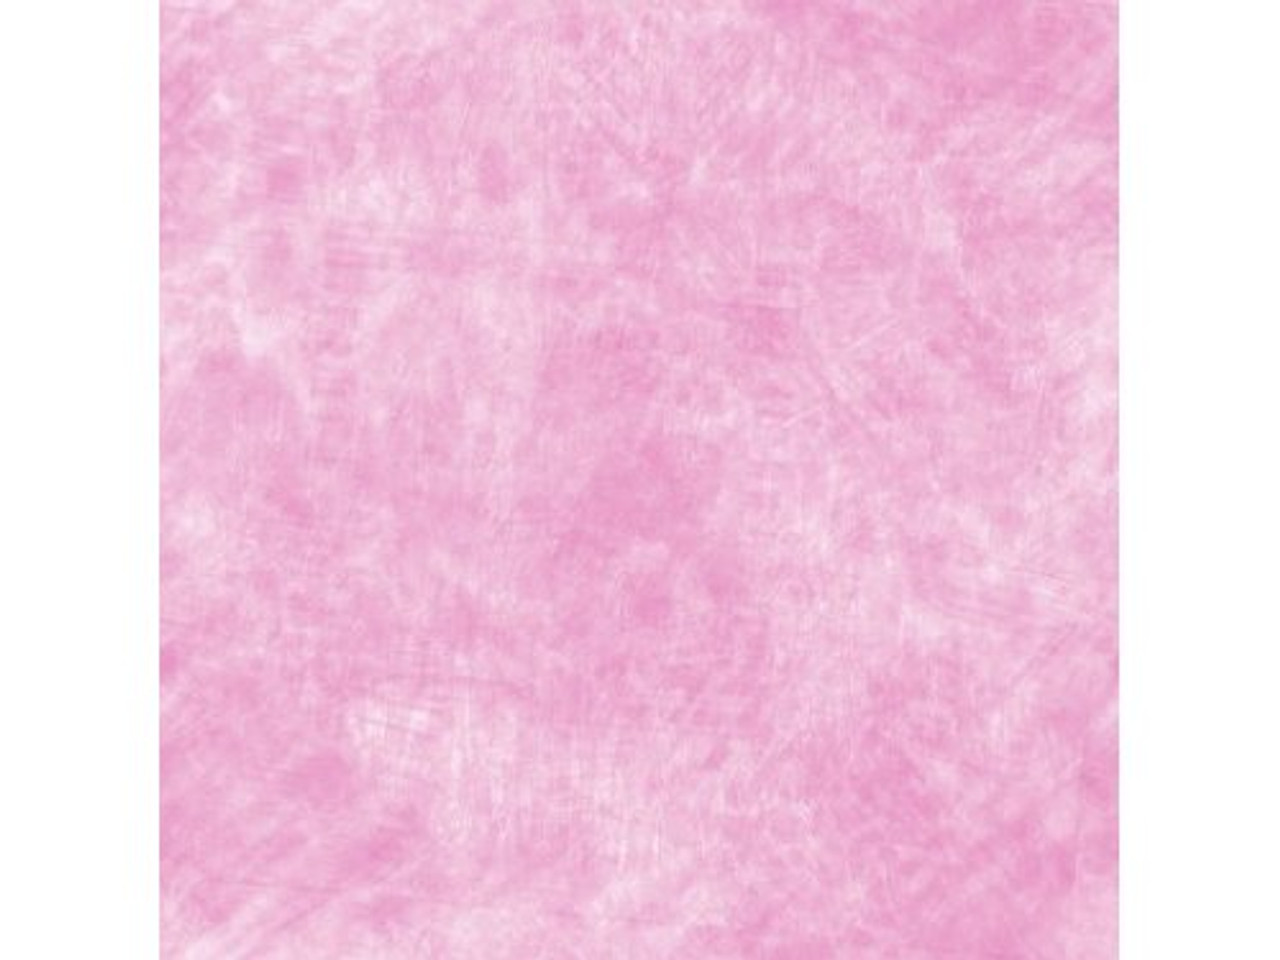 Grunge Paint Light Pink Cotton Fabric 44 in. - shipping included!